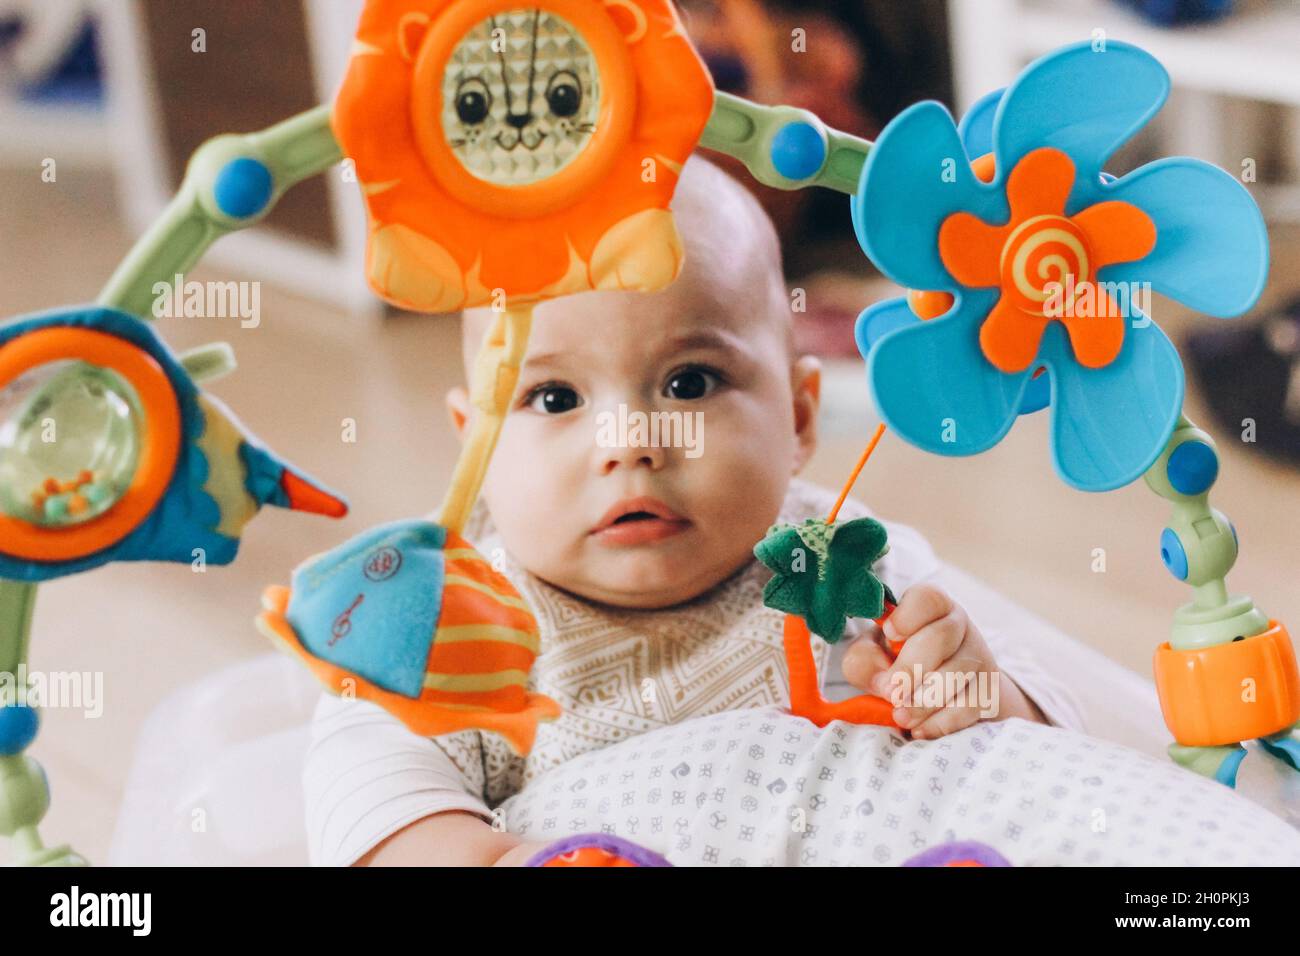 Cute chubby baby playing with colorful toys. Stock Photo